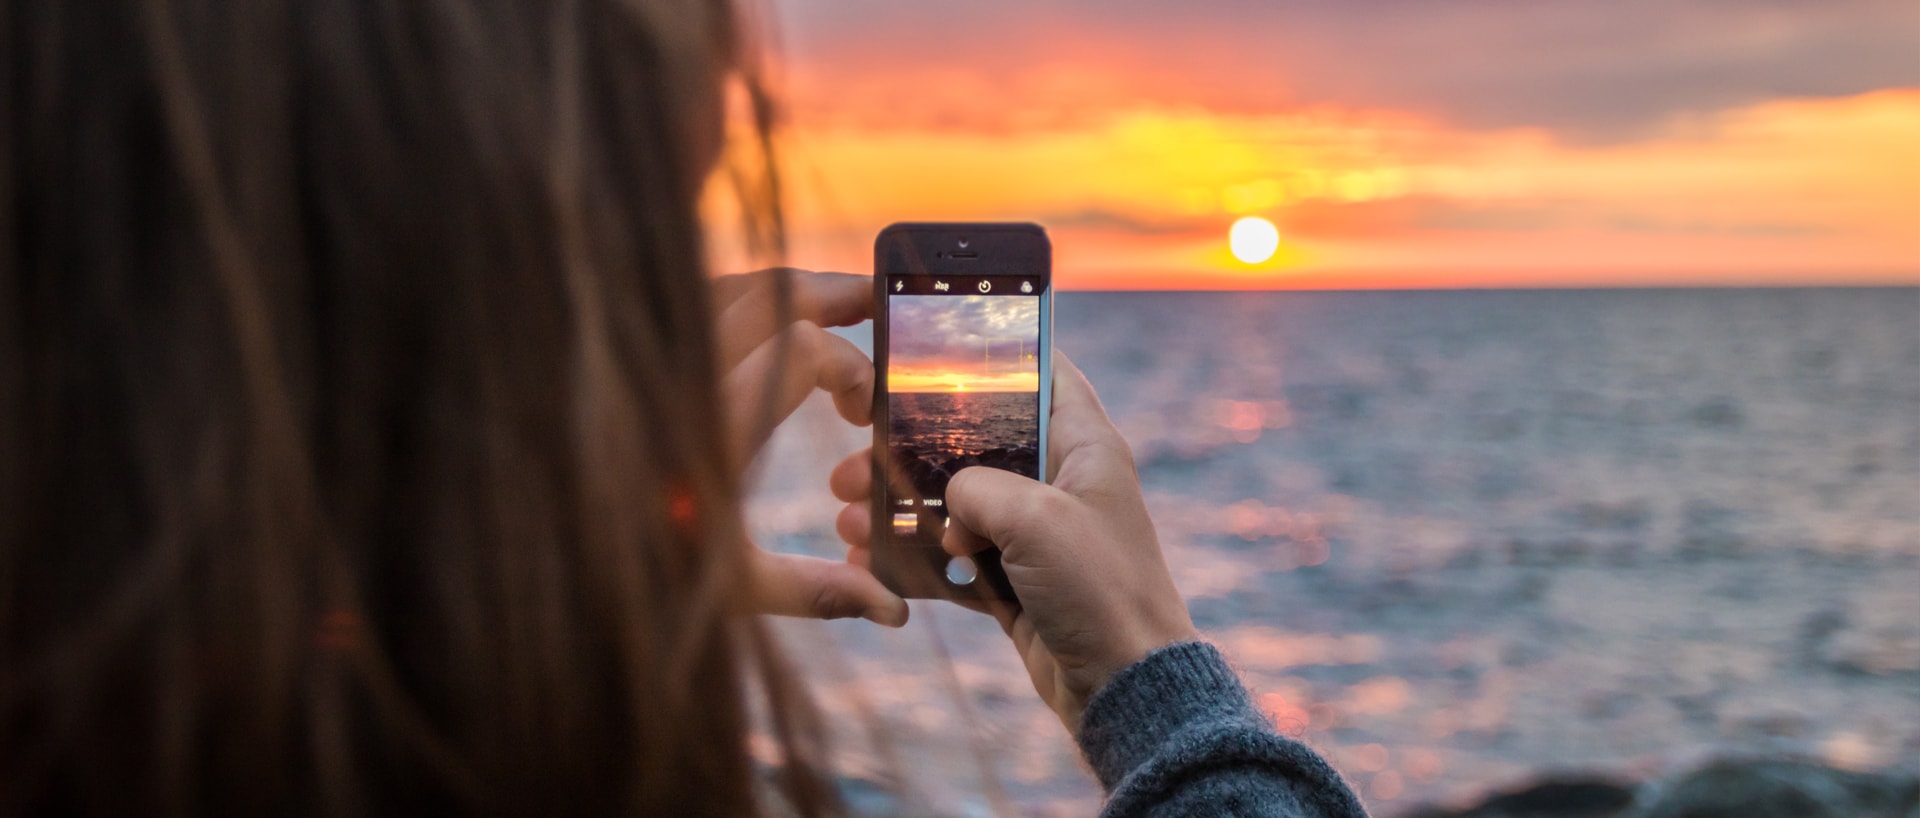 A woman holding up her phone to take a photo of a sunset.